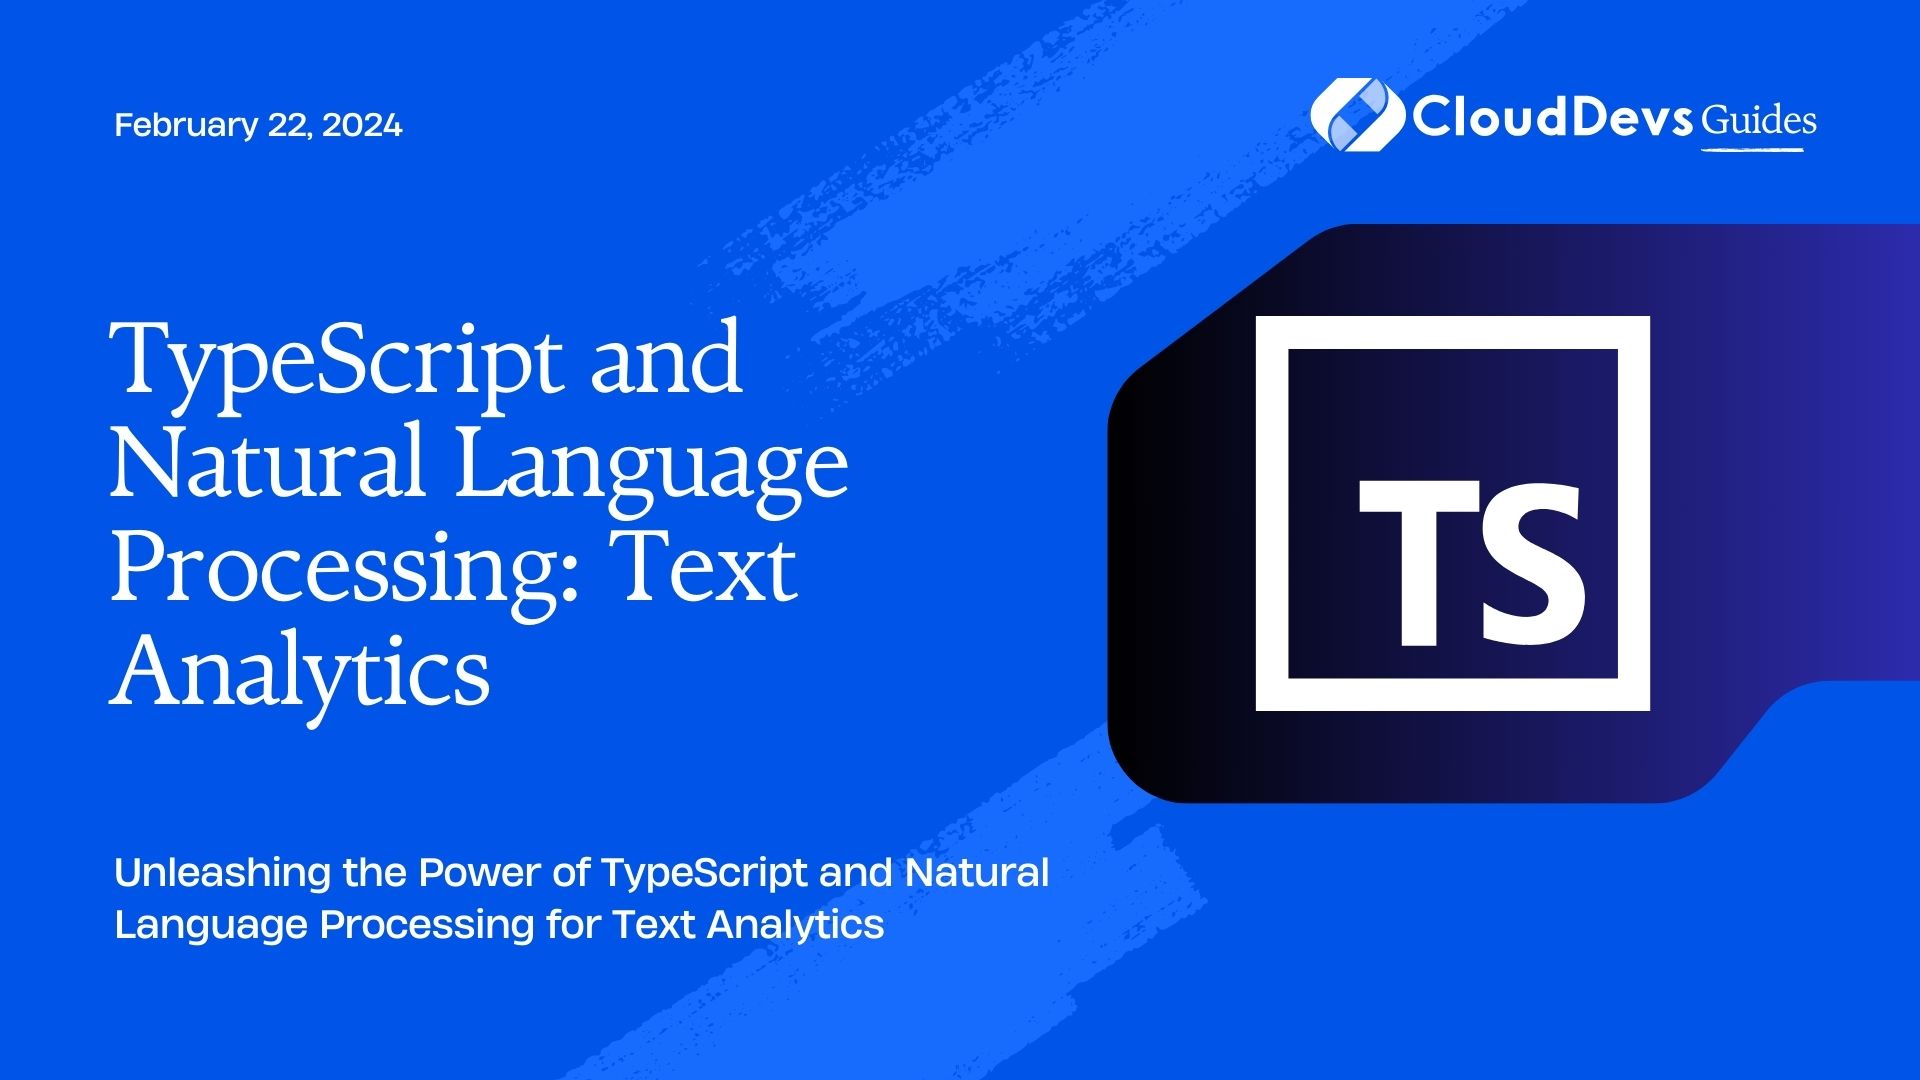 TypeScript and Natural Language Processing: Text Analytics